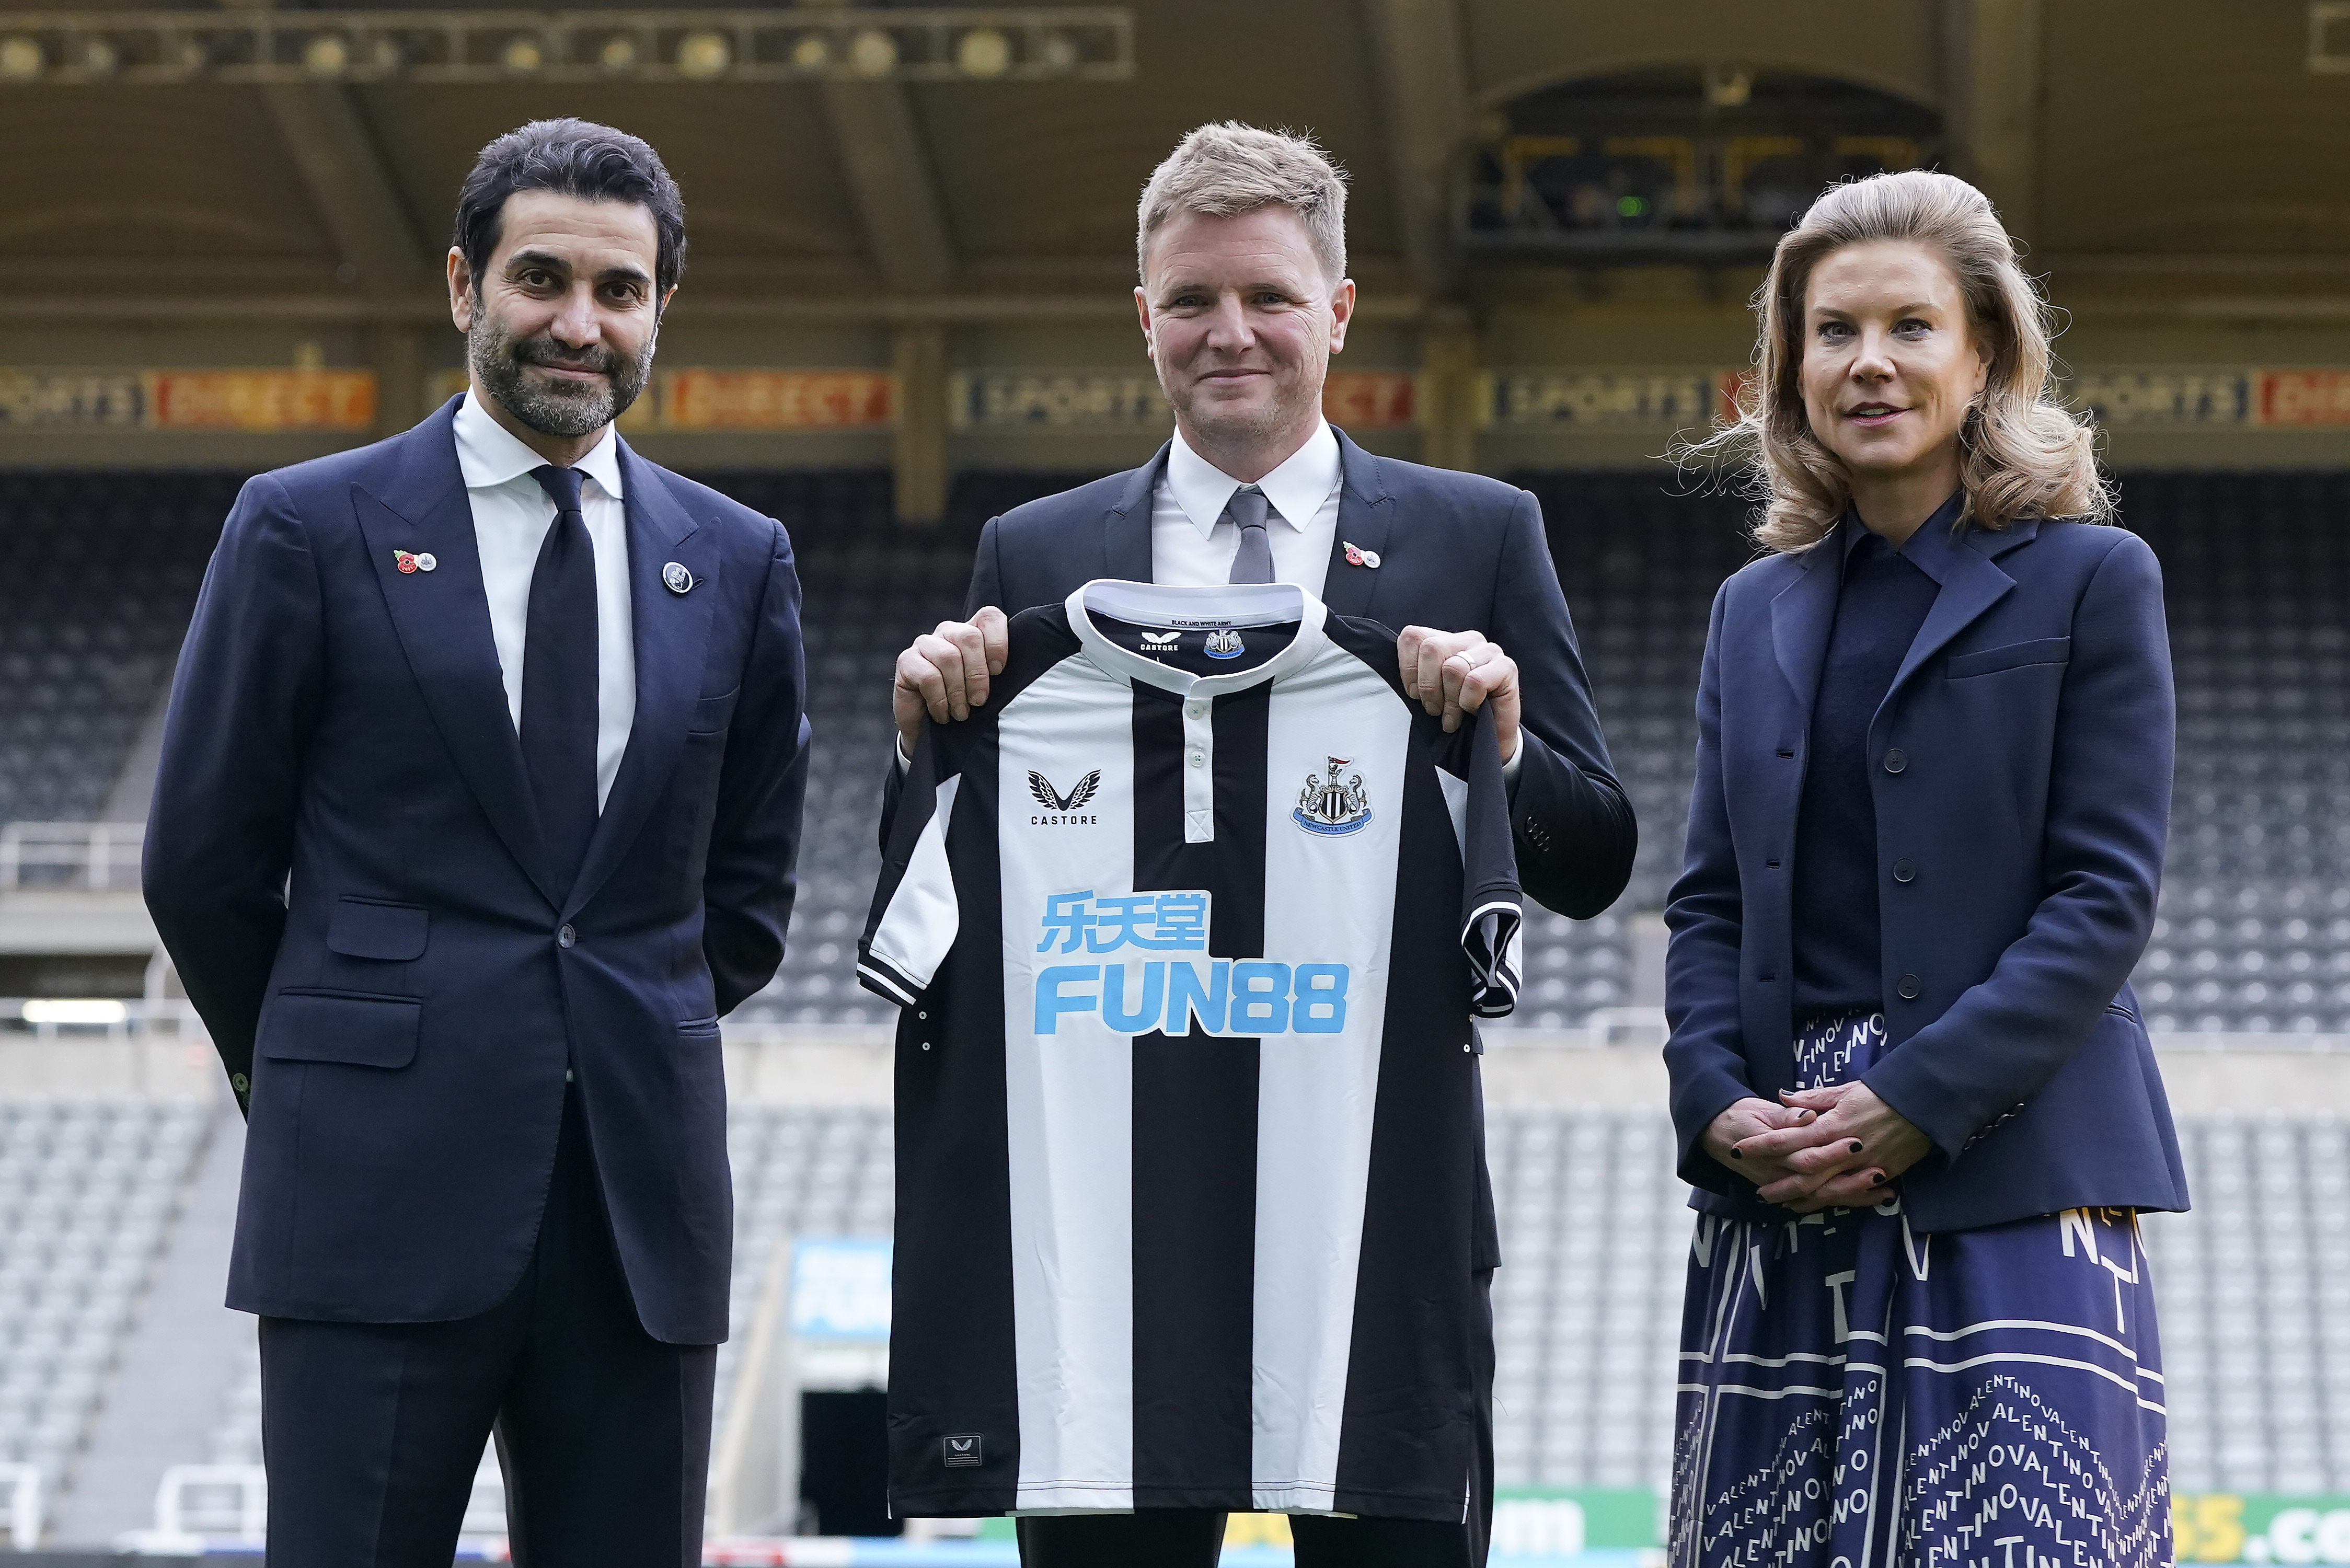 Eddie Howe was appointed Newcastle's new head coach weeks after Amanda Staveley's consortium completed its takeover